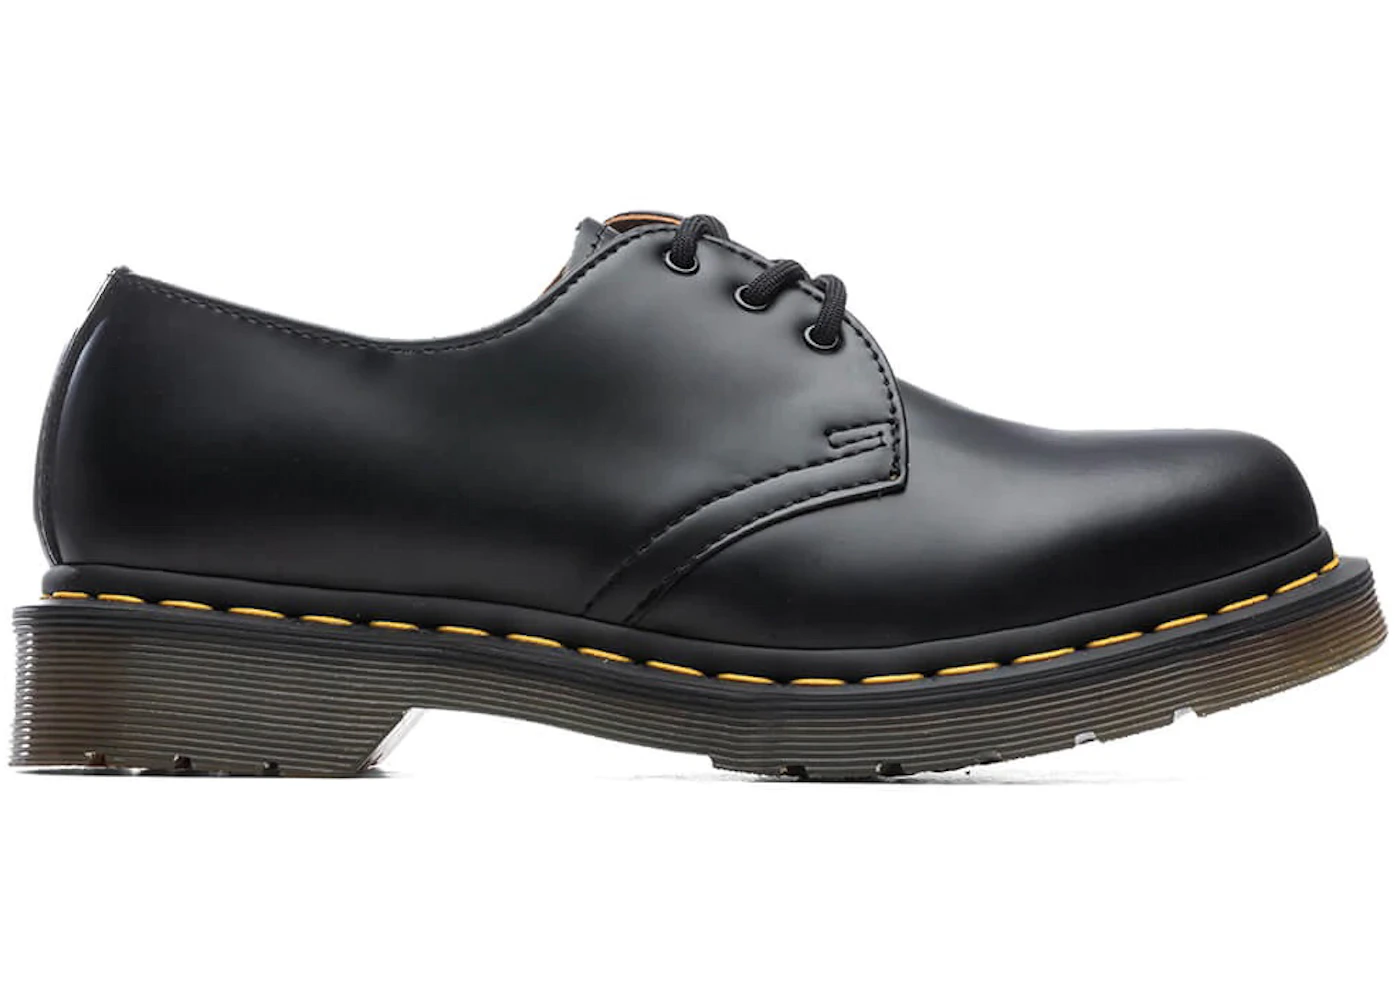 Dr. Martens 1461 Smooth Leather Oxford Black (W) - 11837002 - US